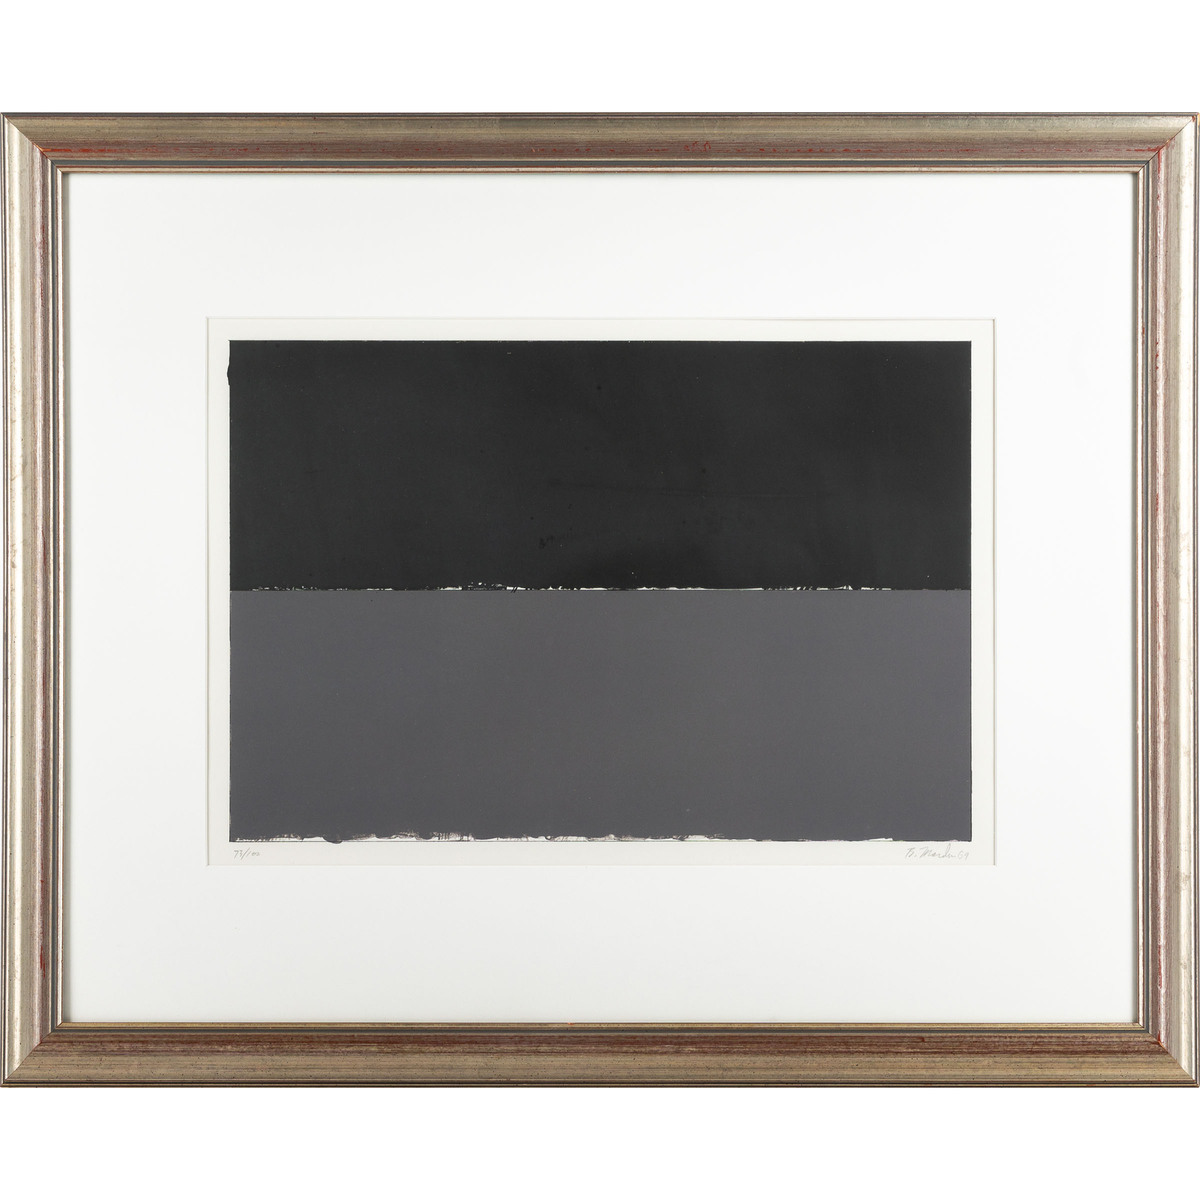 Brice Marden (1938-2023), GULF, FROM "NEW YORK" 10/69, 1969 [L. 16], signed, dated "69," and numbere - Image 2 of 5